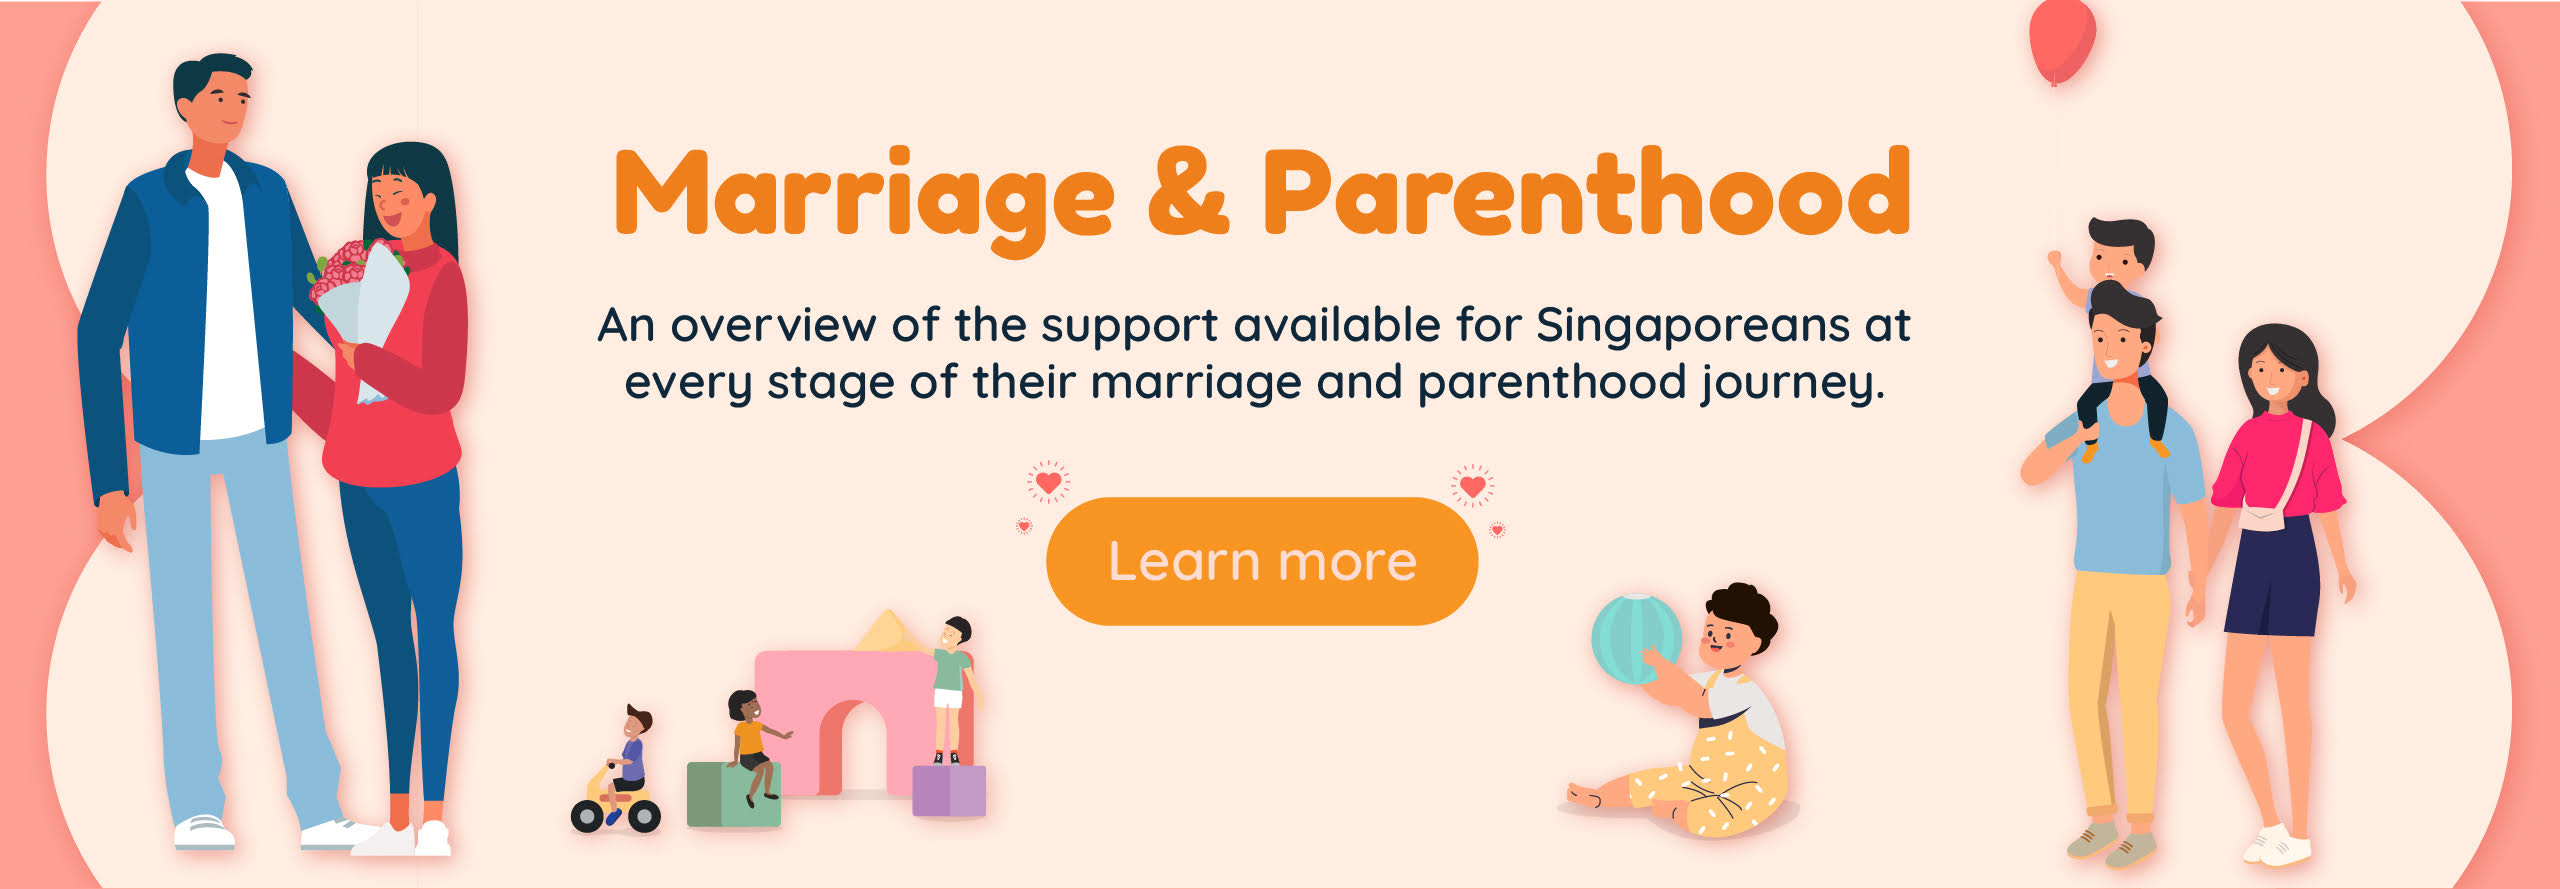 Marriage and Parenthood Banner